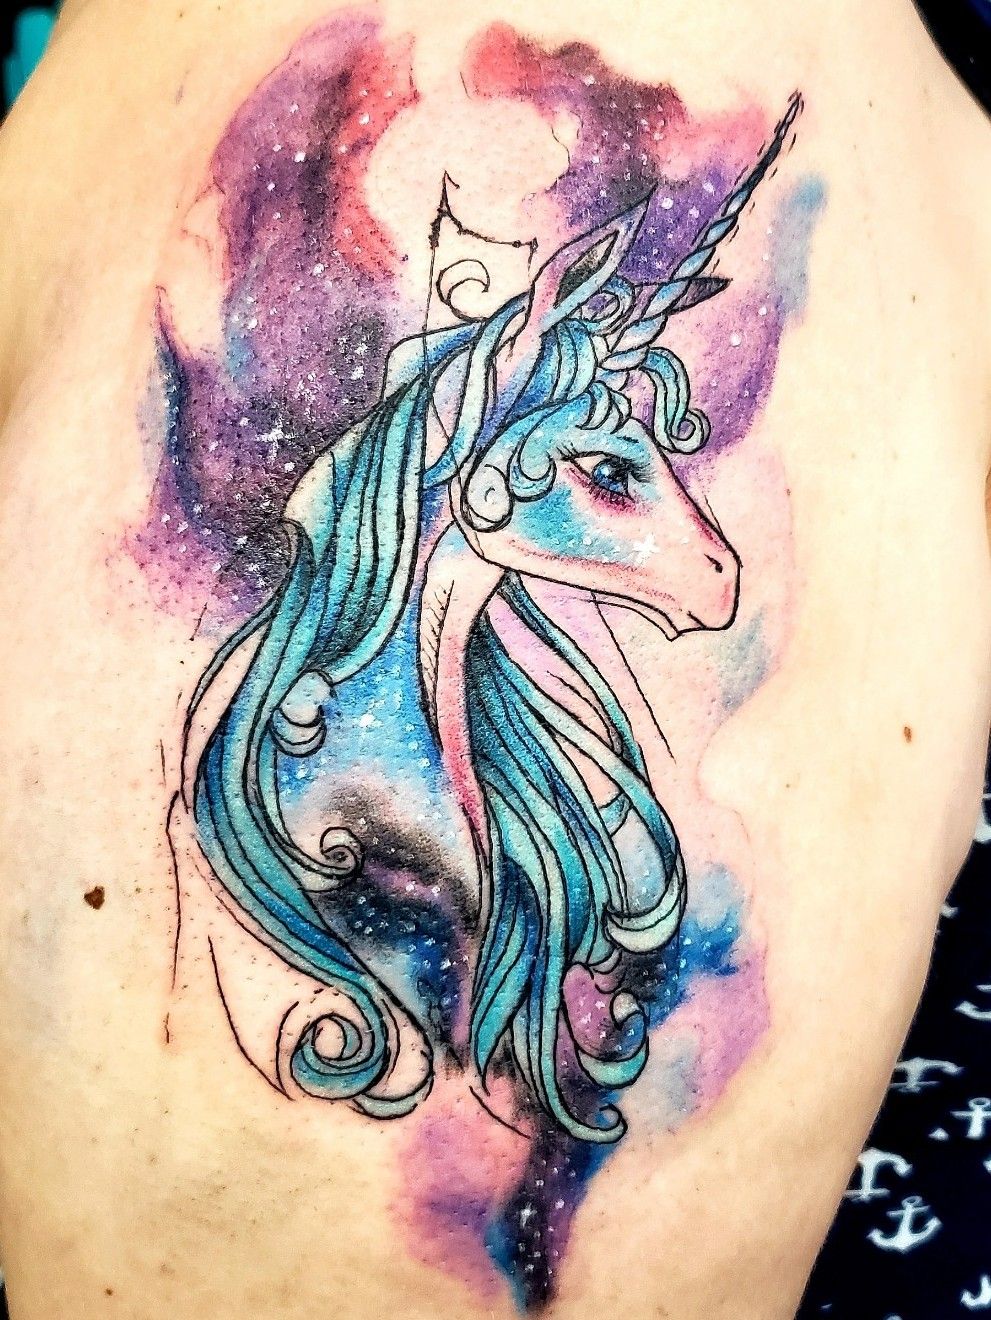 Ive been wanting this Last Unicorn tattoo forever Today was the day Done  by Tom at Eternal Tattoos Inc Eastpointe MI  rtattoos